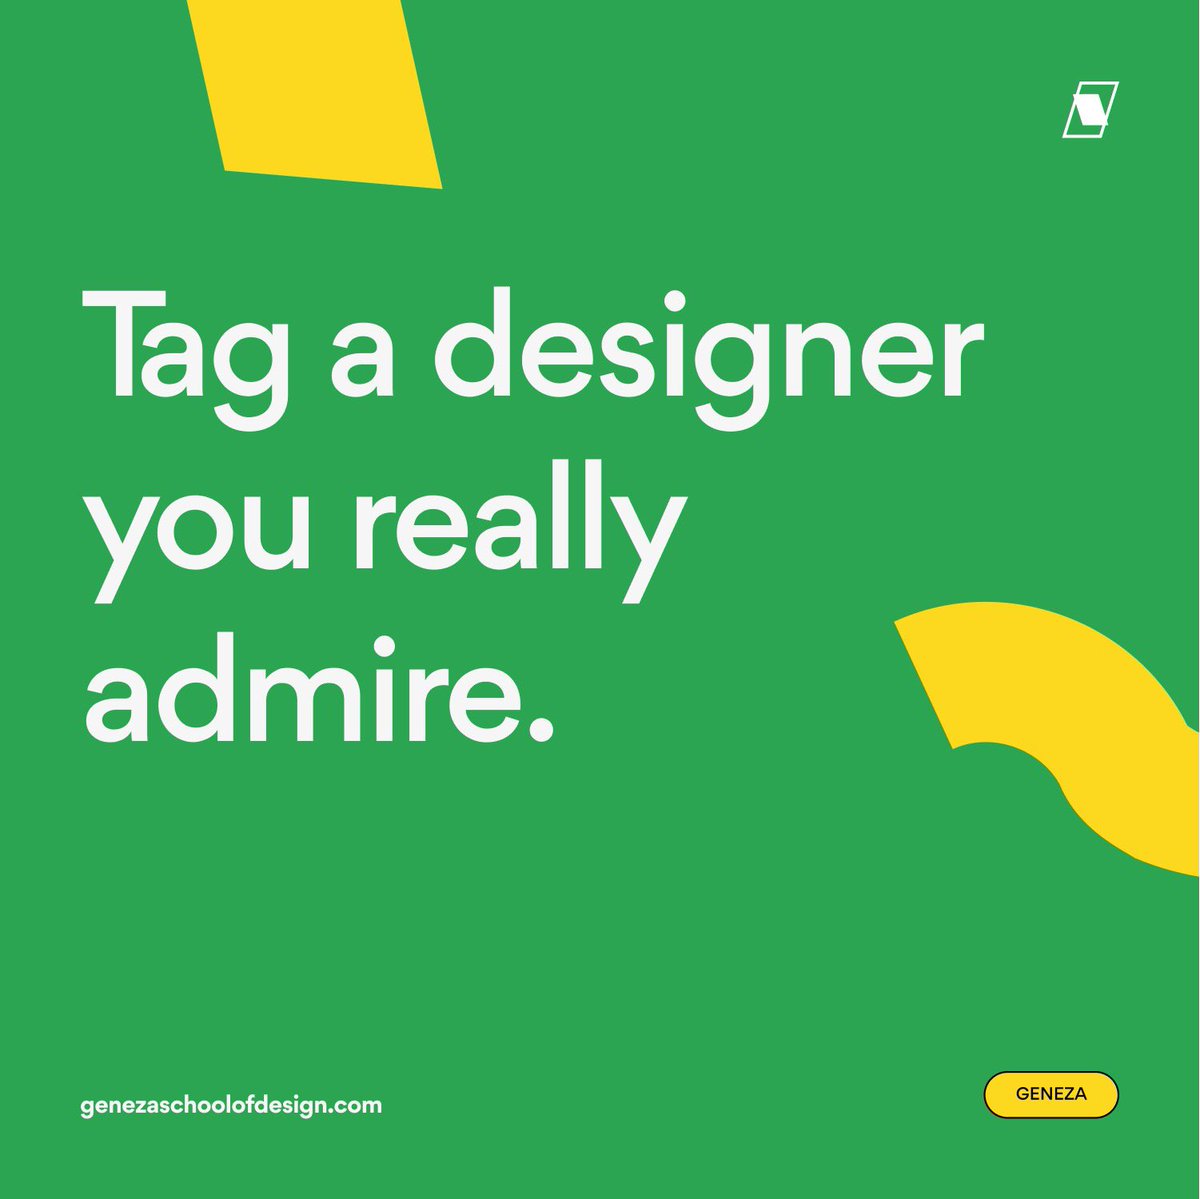 Tag a designer you really admire and has inspired your journey. Let’s make them feel special today.

#design #art #uxlearn #learnux #learnui #uitips #uxtips #uxdaily #uidaily #uxbooks #uxresources #design #designresources